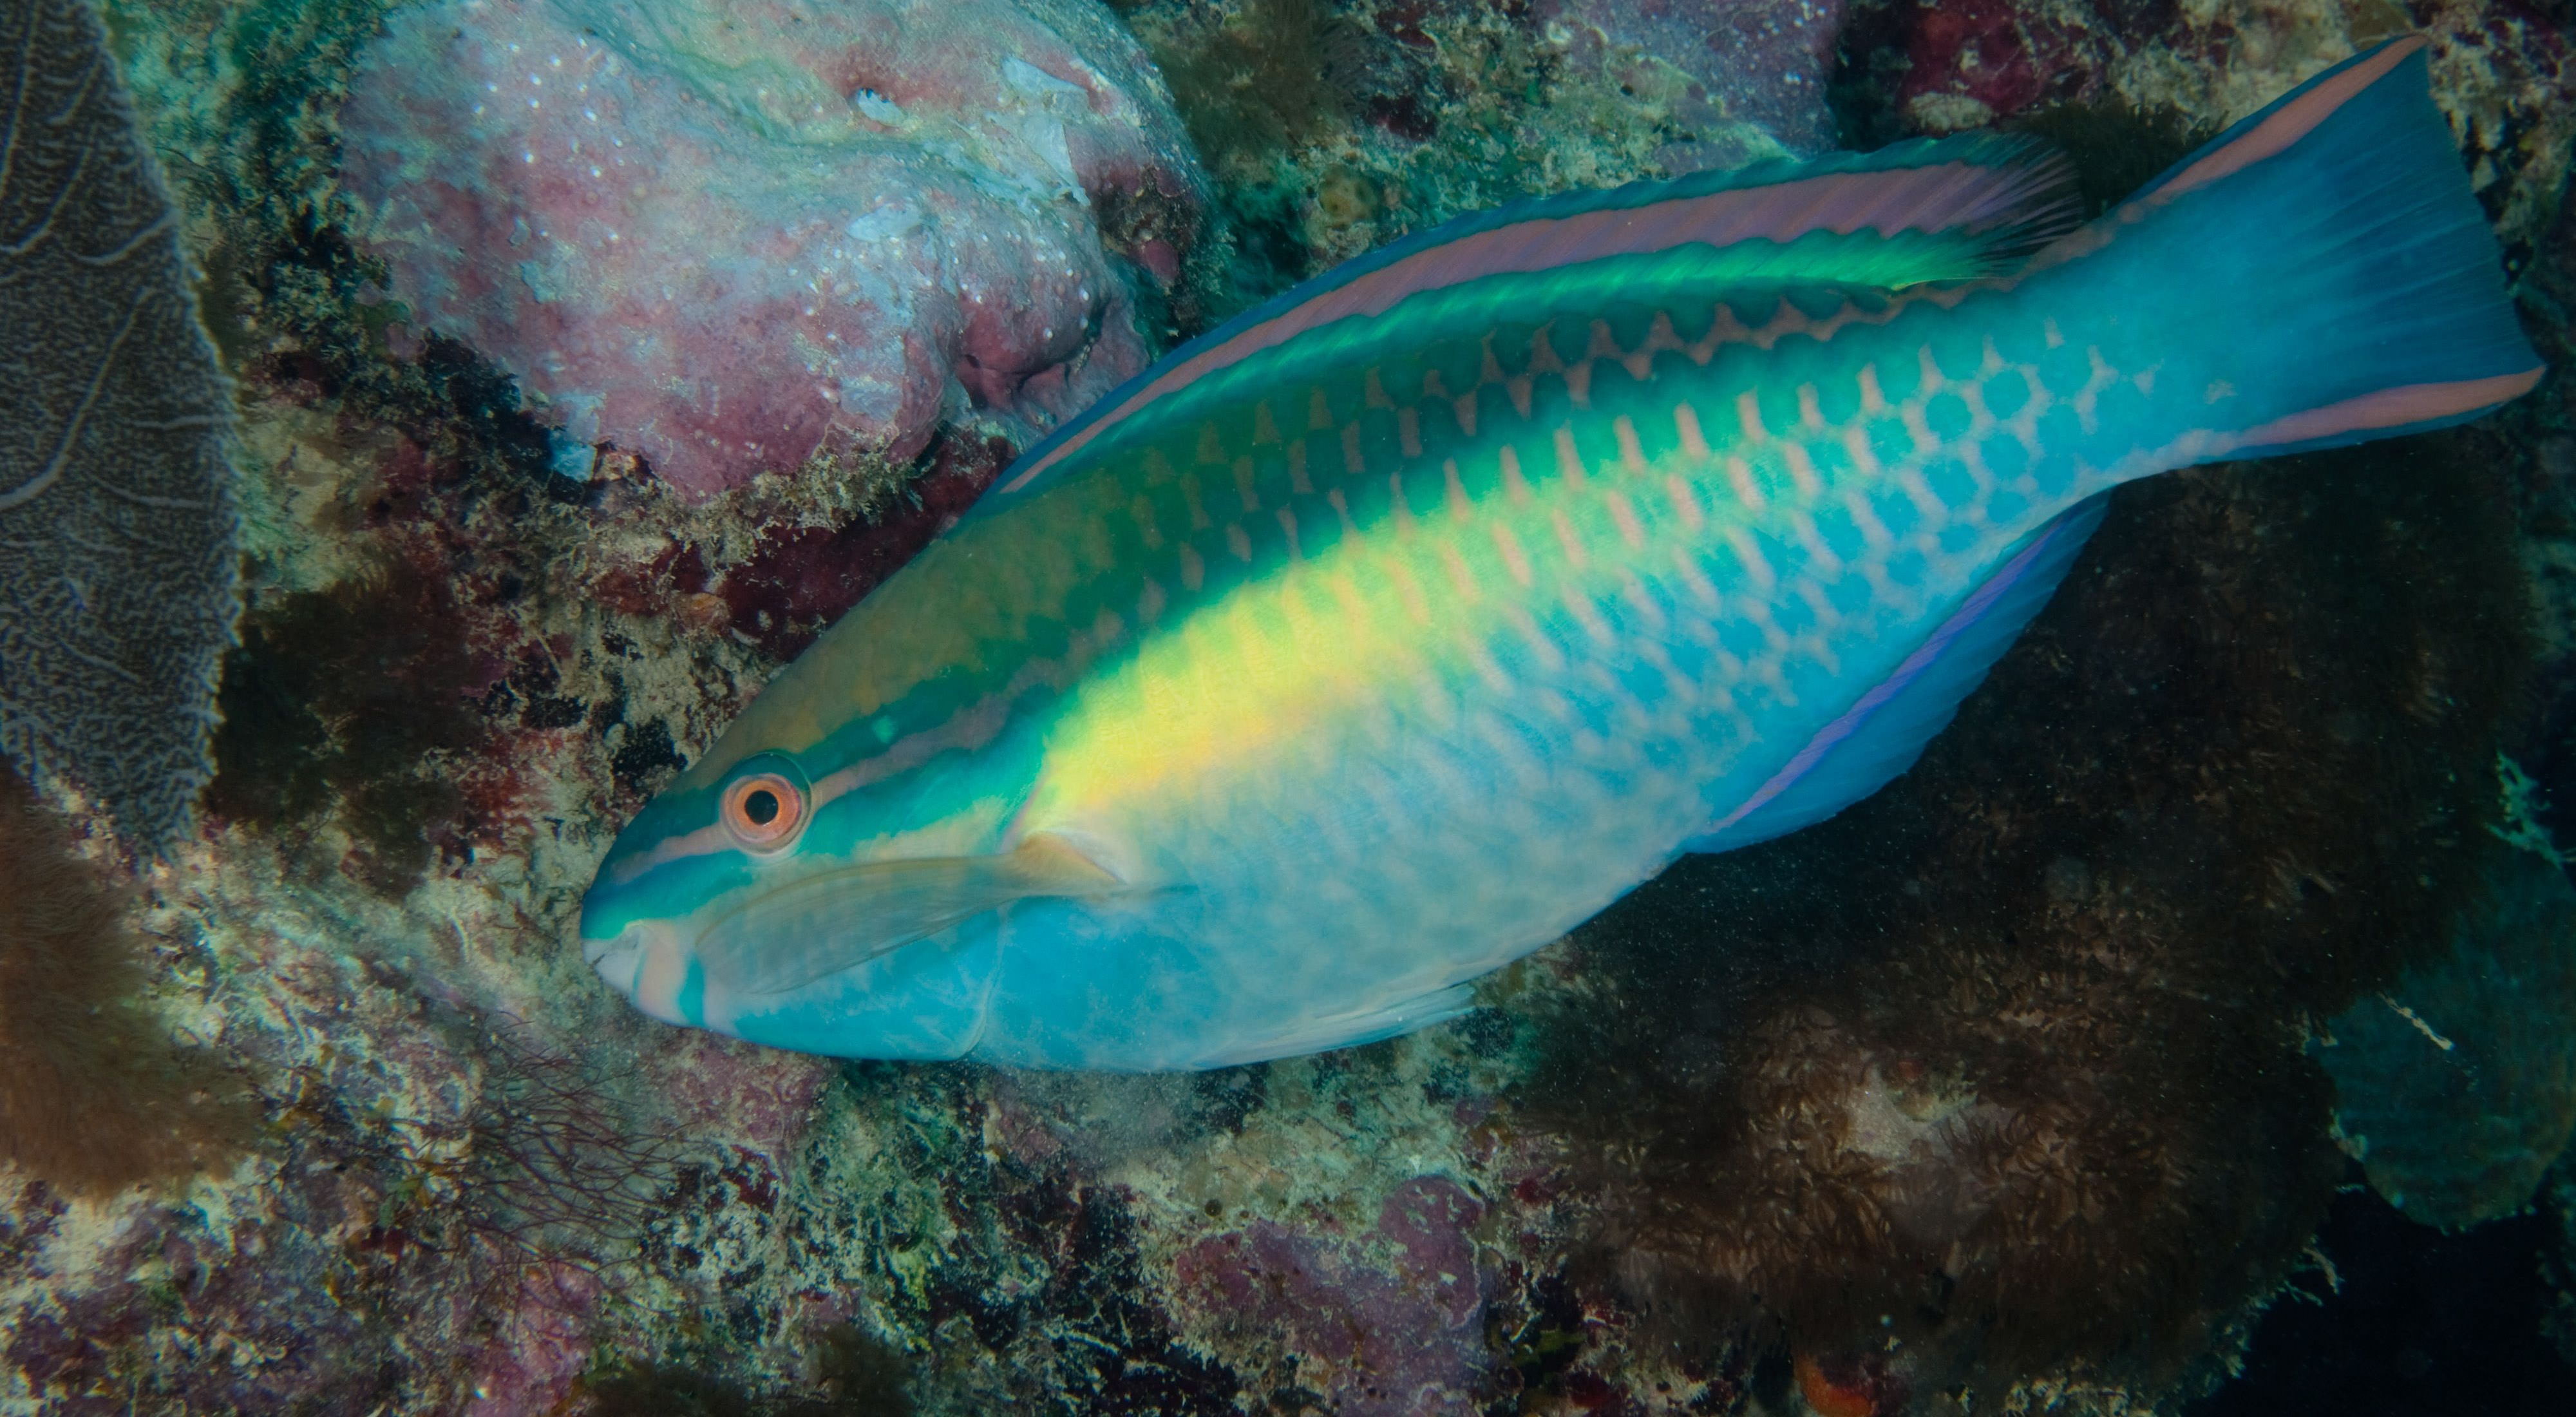 Side view of a parrotfish.